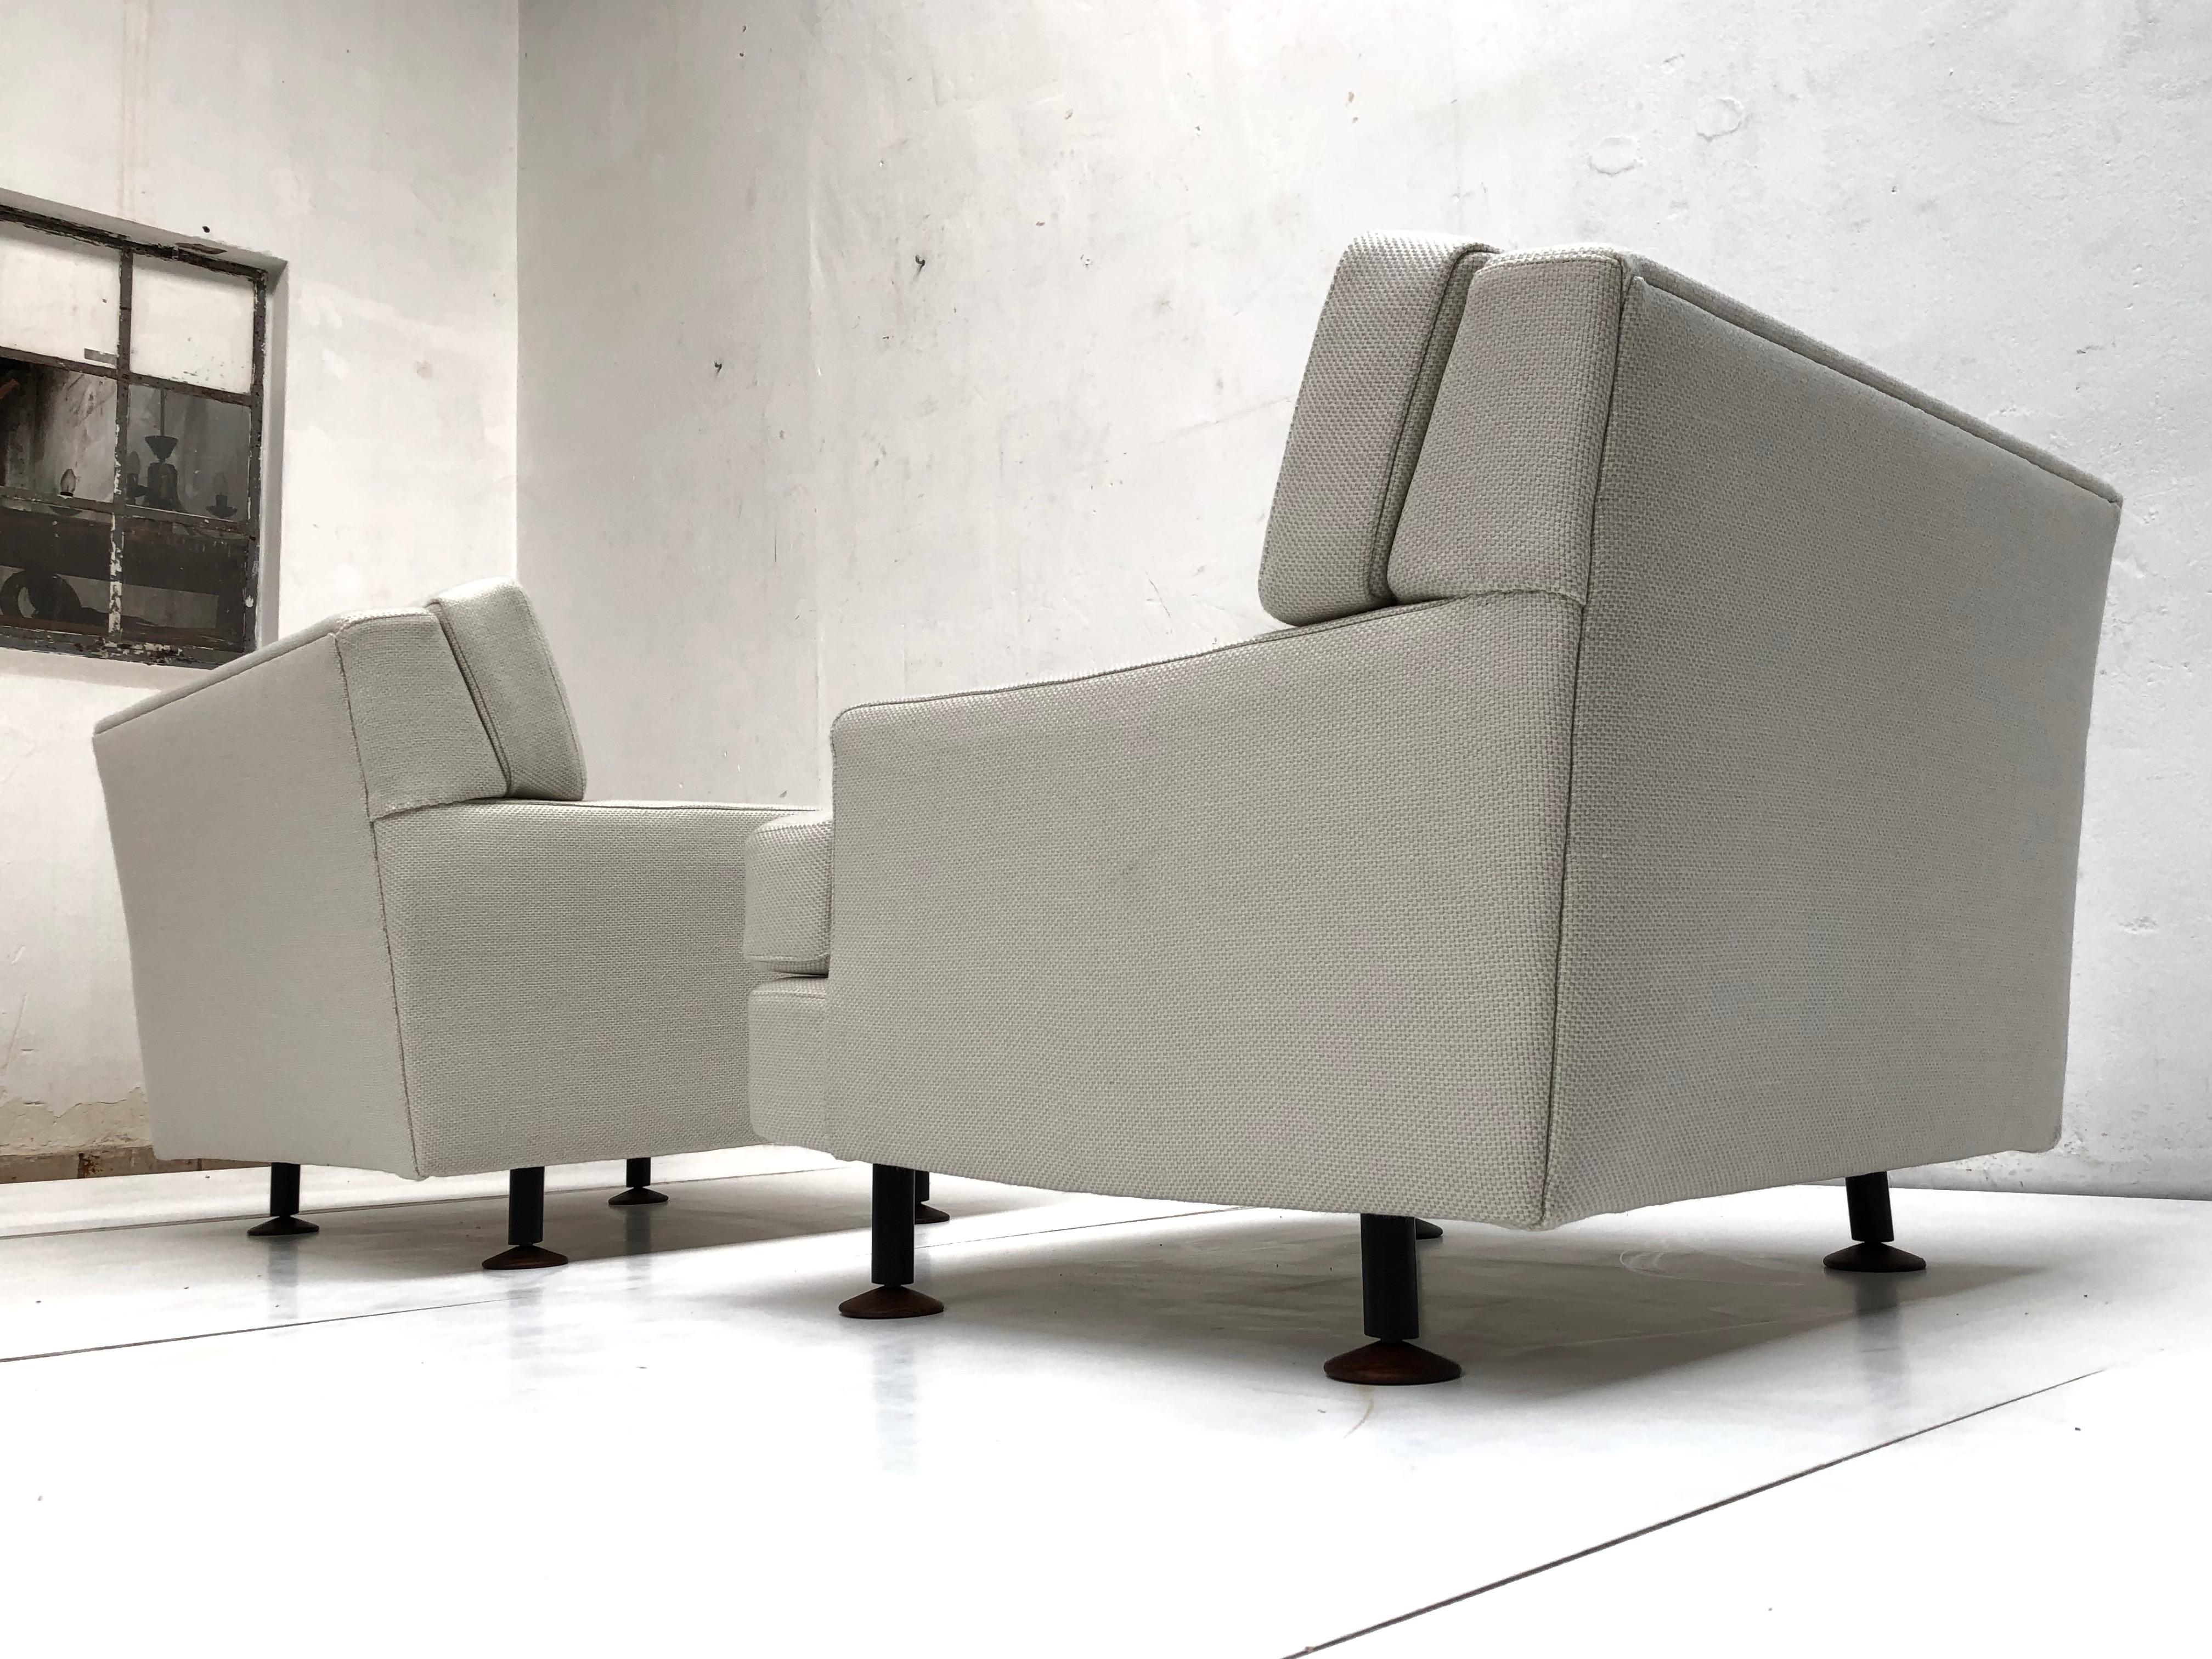 Pair of Restored 'SQUARE' Lounge Chairs by Zanuso for Arflex, Italy, 1962, Signed 1